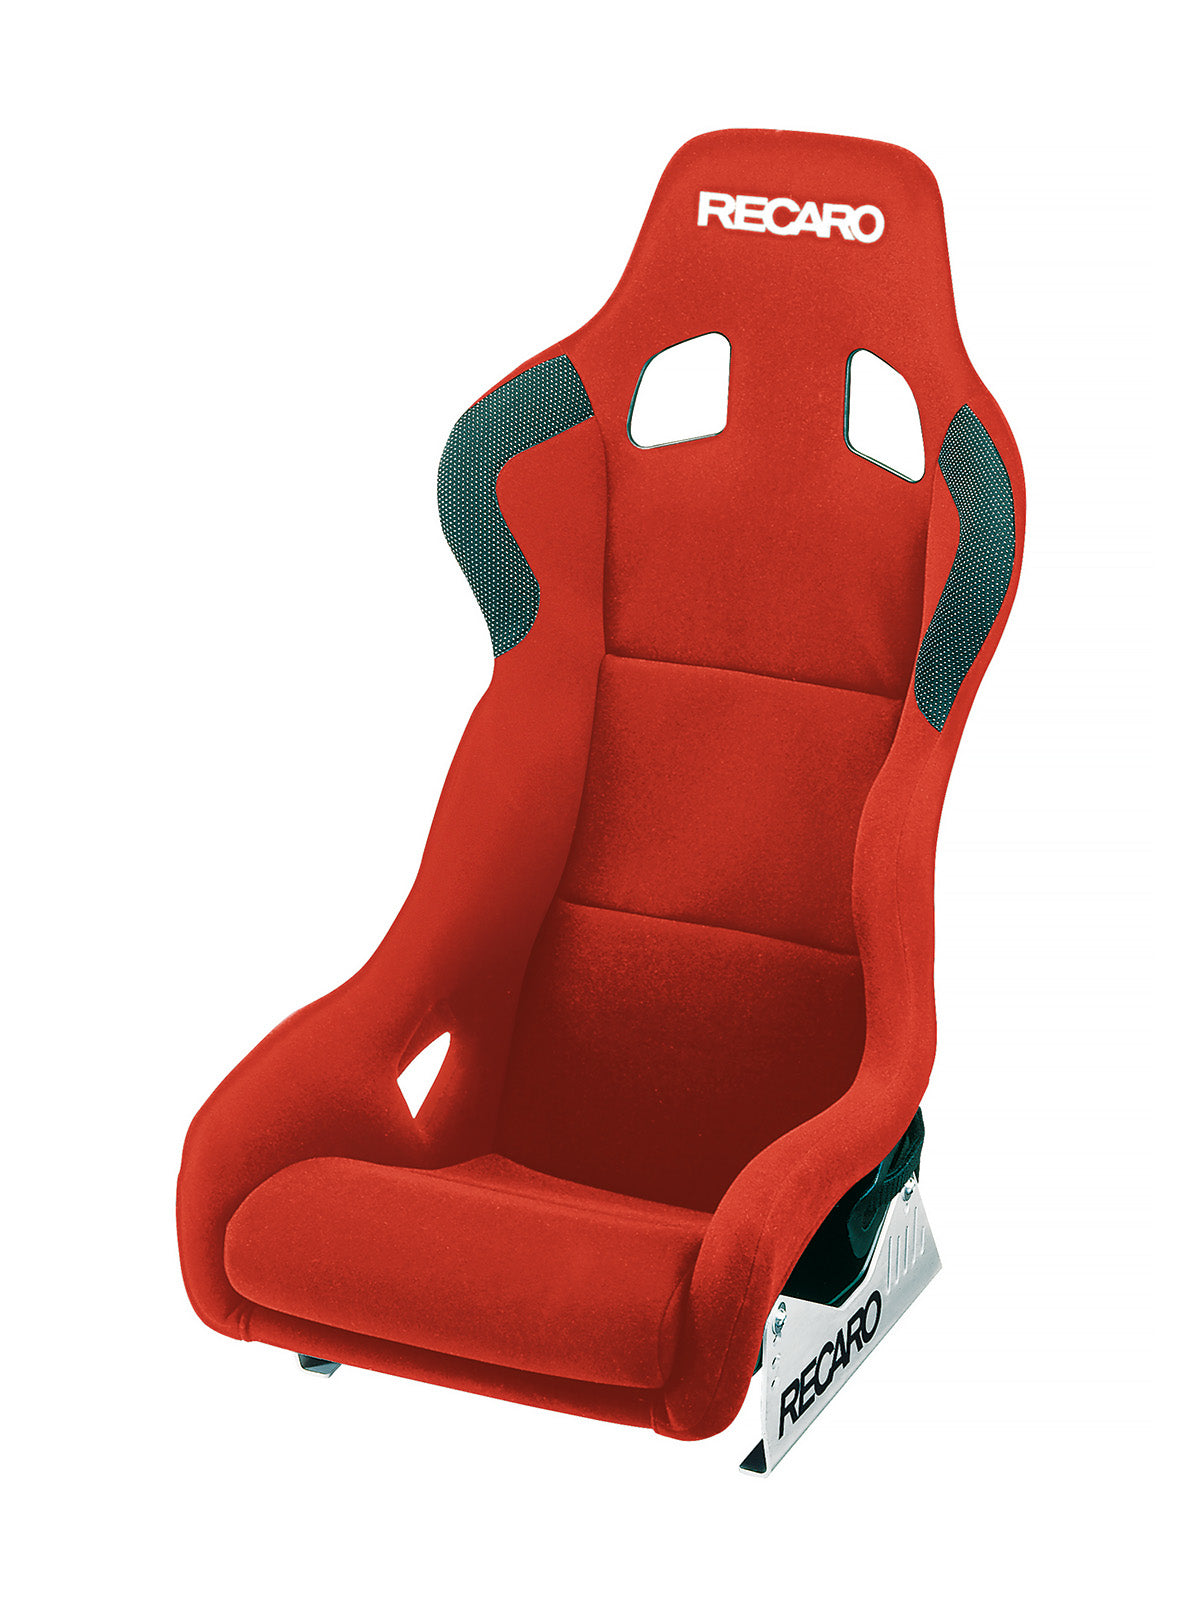 Elevate your motorsport game with the Recaro Profi SPG XL Racing Seat, a spacious and performance-focused seating solution.